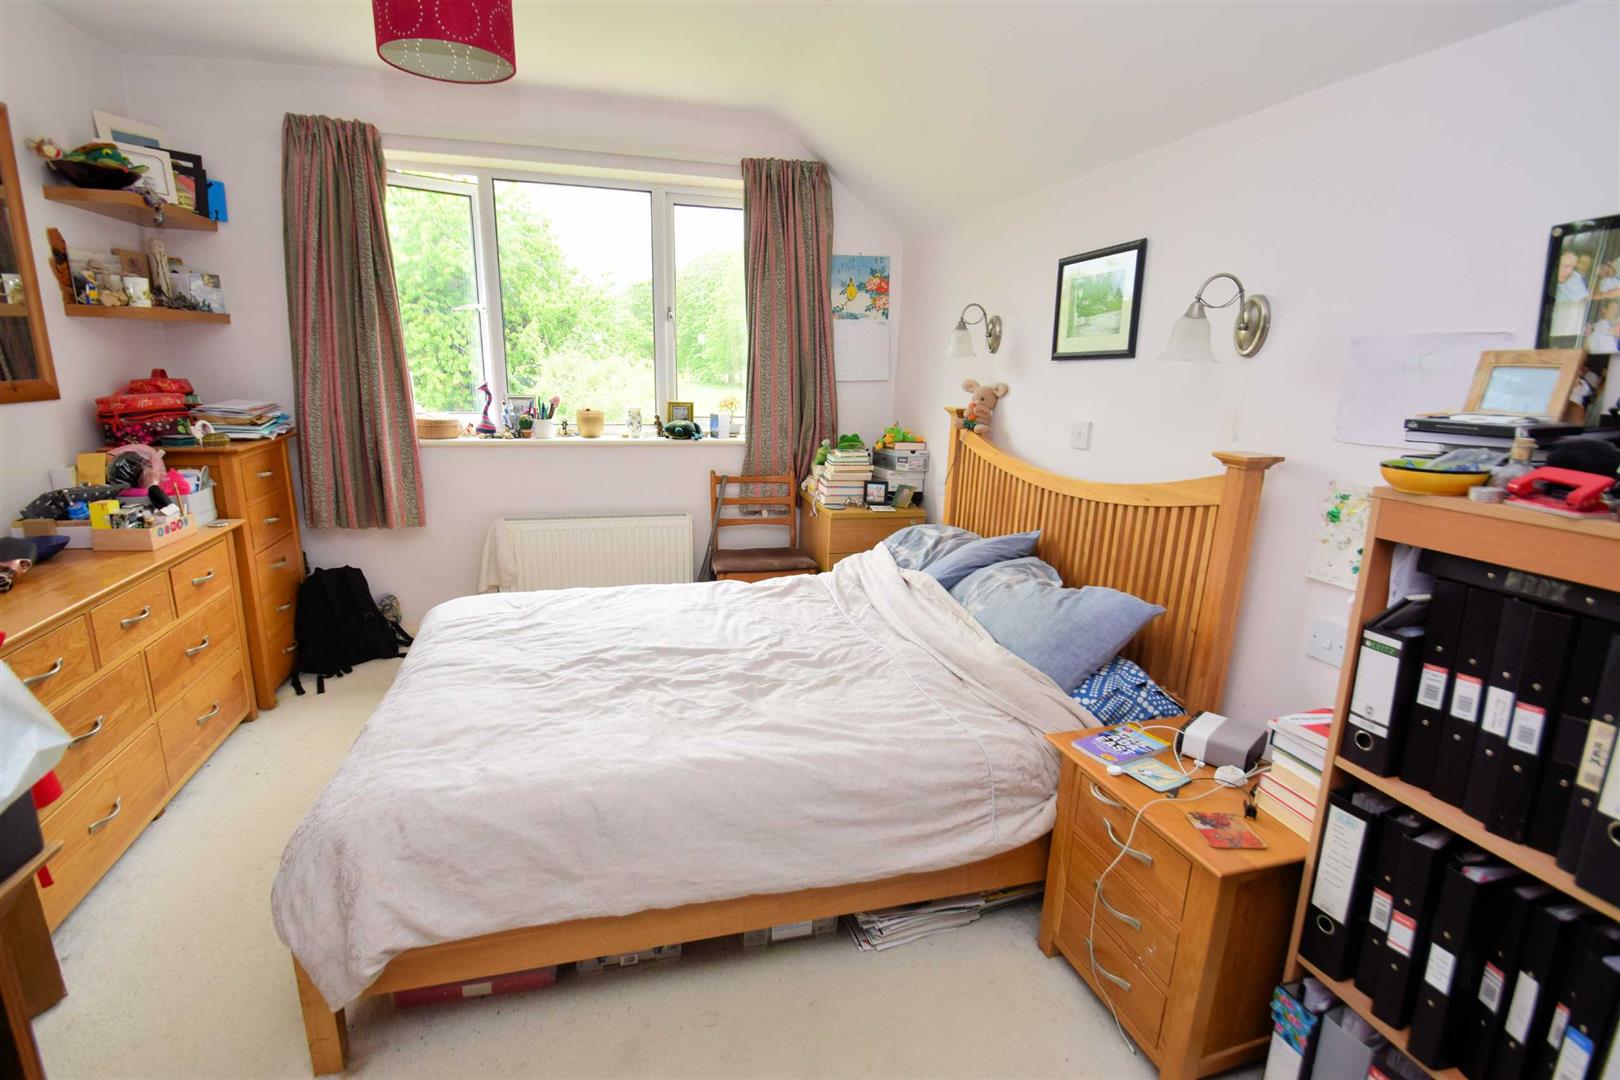 Norman Road Caversham house for sale in Reading